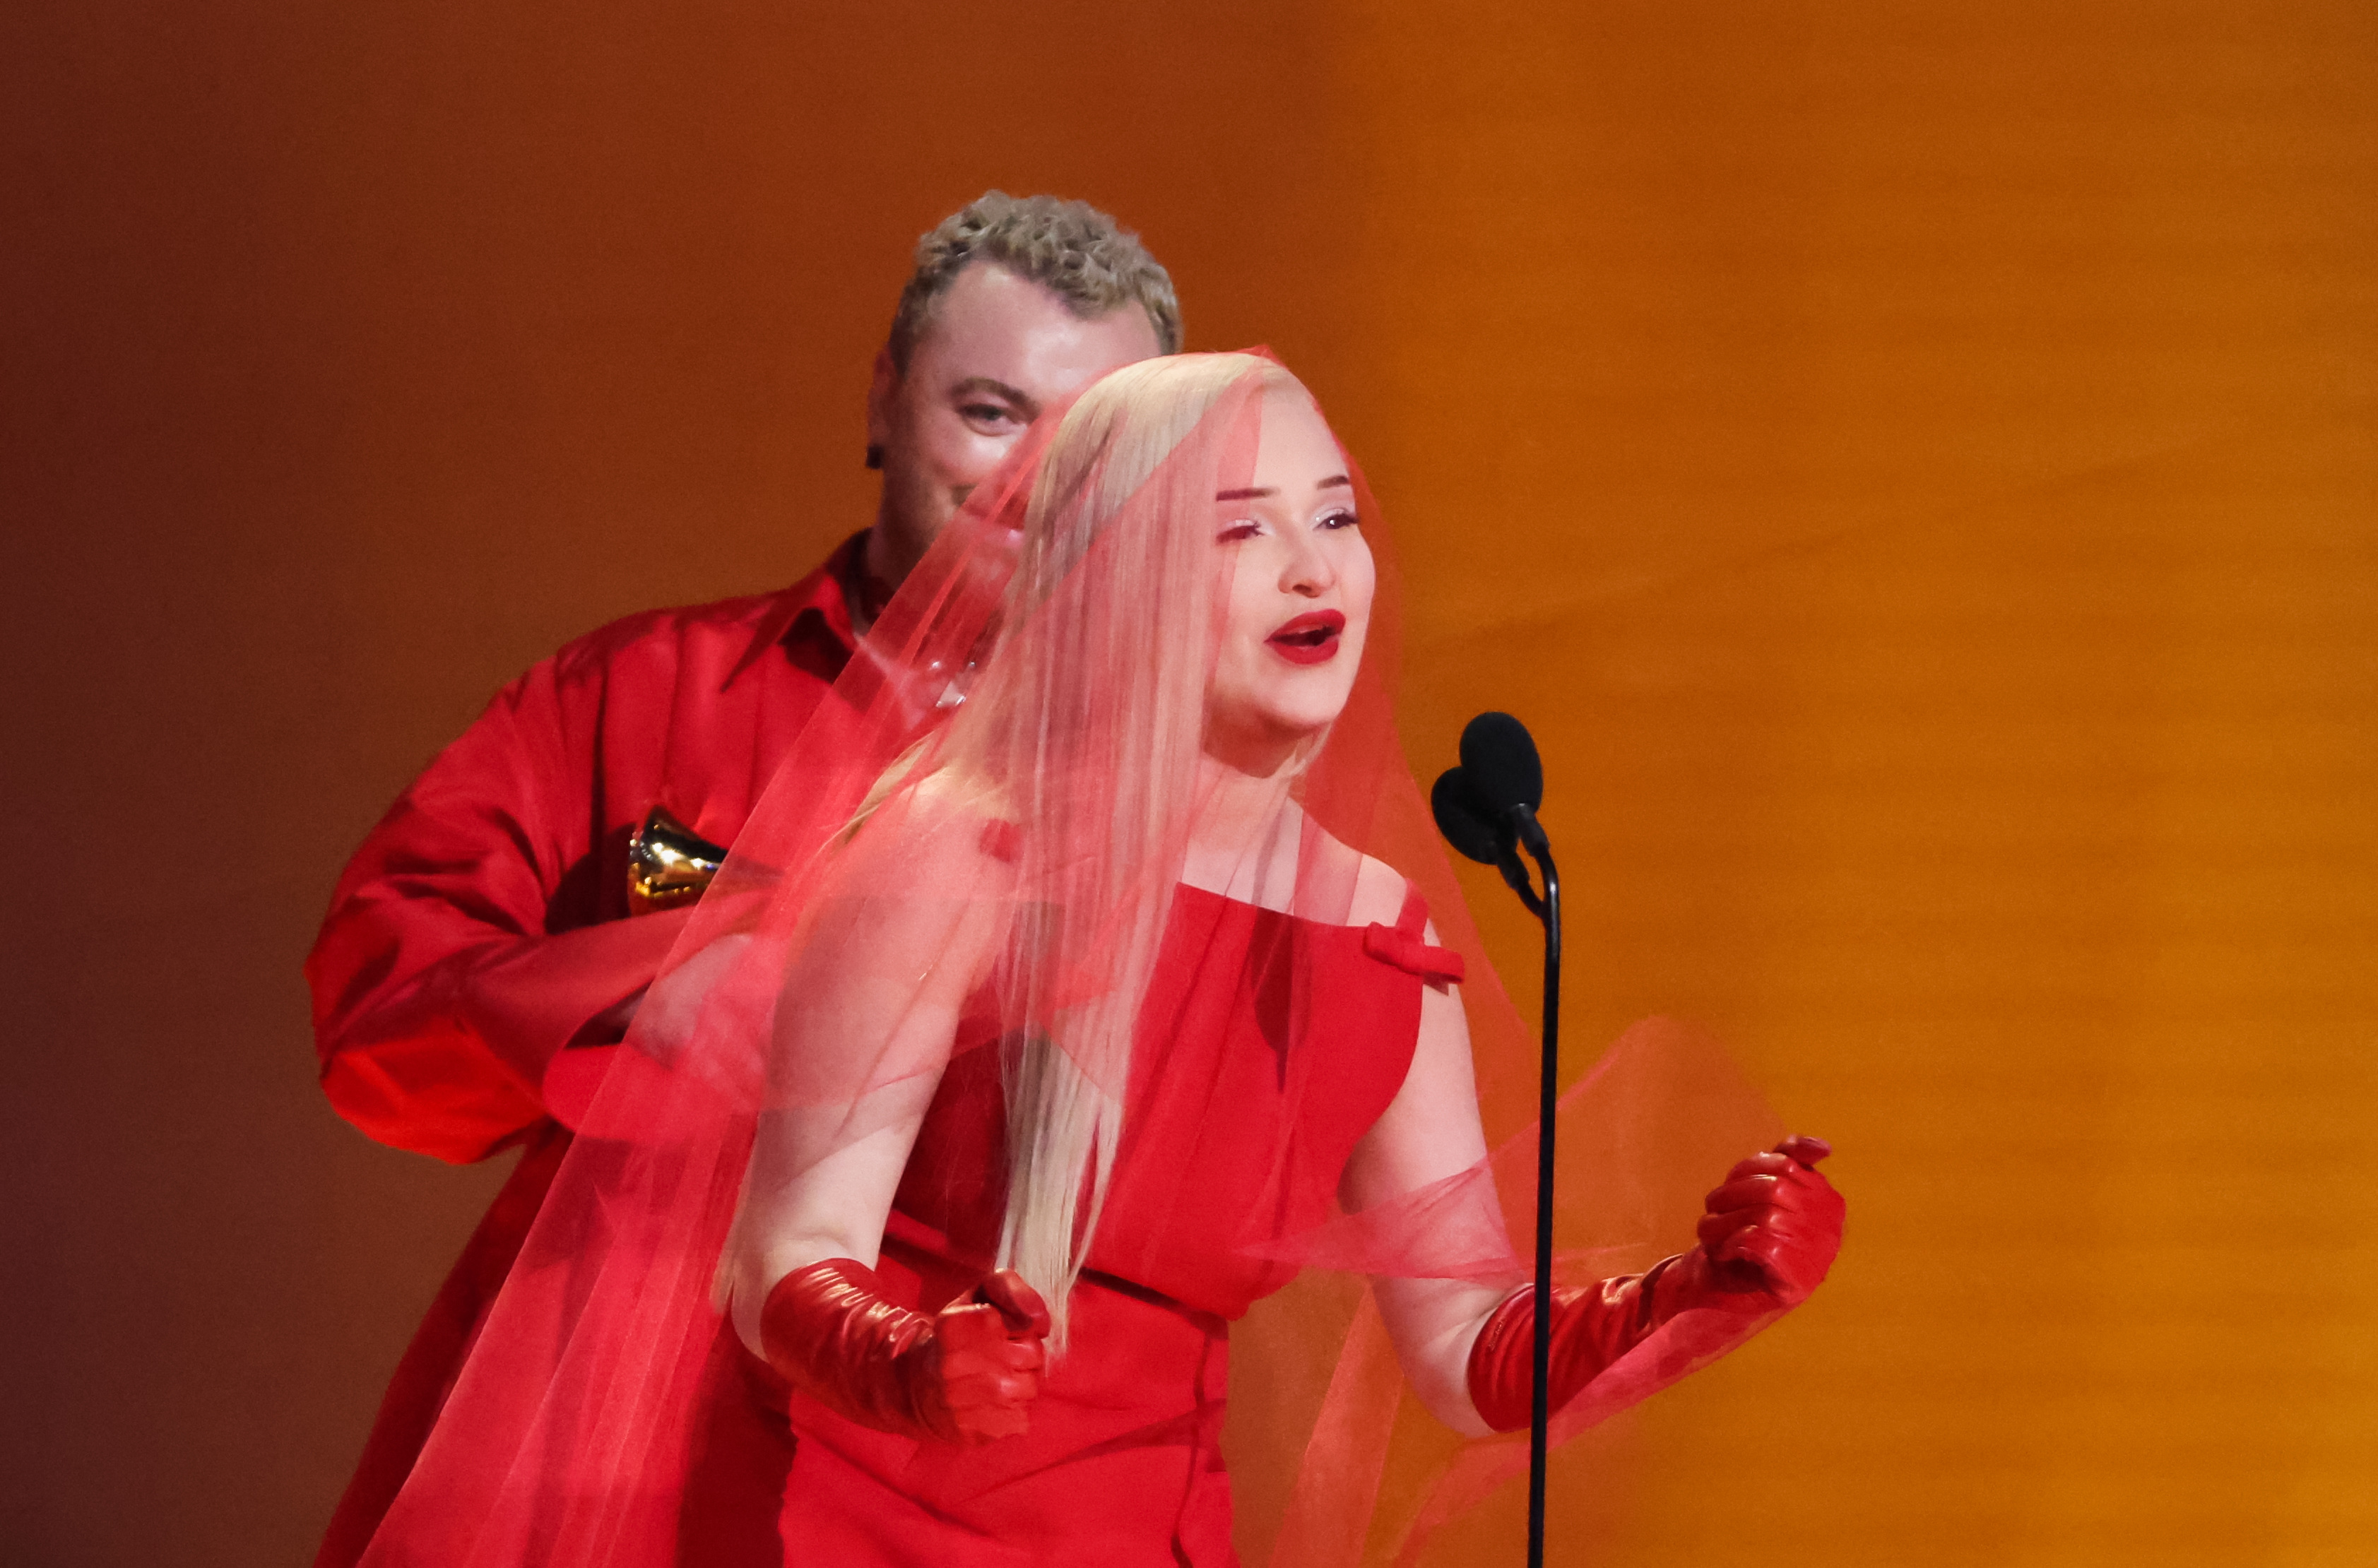 Sam Smith and Kim Petras accept the award for Best Pop Duo/Group Performance for "Unholy" during the 65th Annual Grammy Awards in Los Angeles, California, U.S., February 5, 2023. REUTERS/Mario Anzuoni